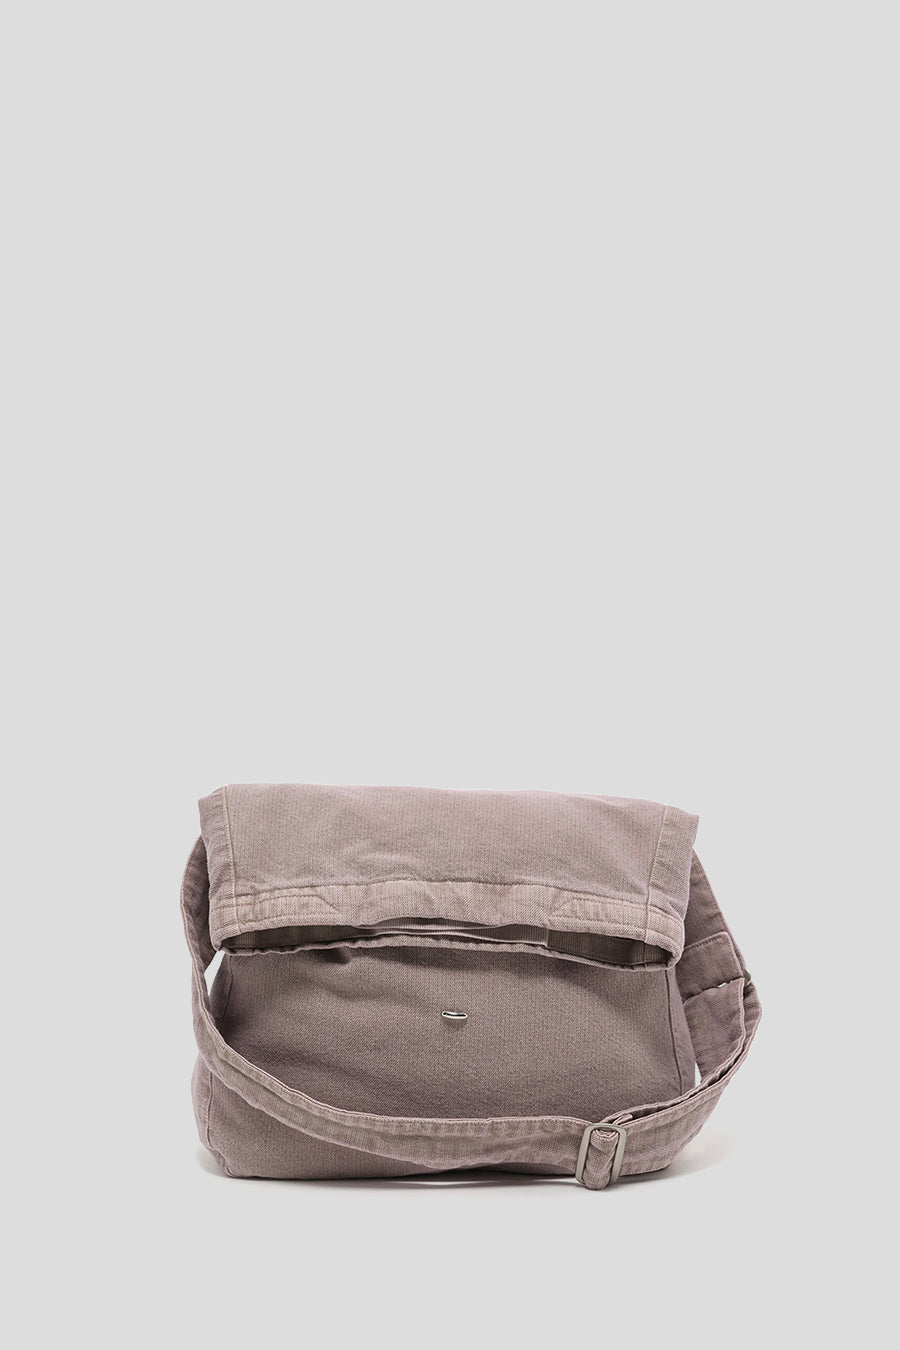 Our Legacy - BEIGE SLING BAG - LE LABO STORE